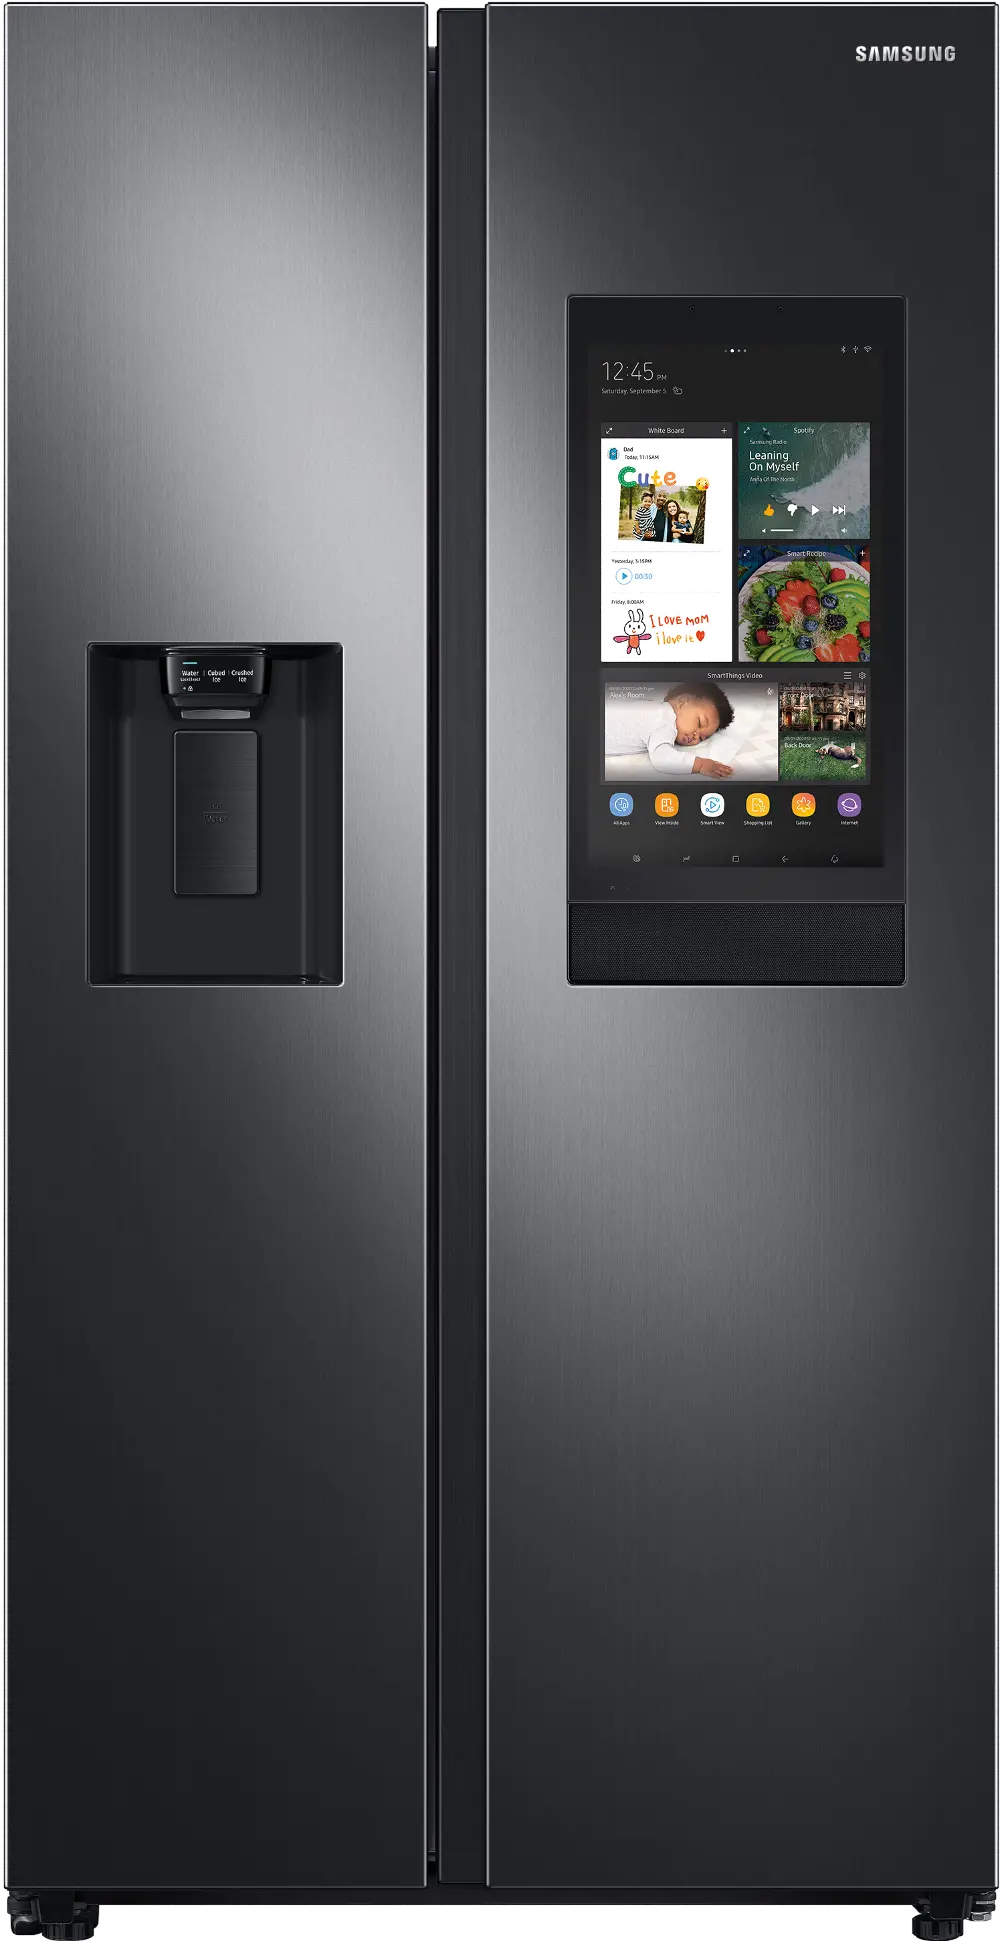 RS22T5561SG Samsung 22.5 cu ft Side by Side Refrigerator - Counter Depth Black Stainless Steel-1